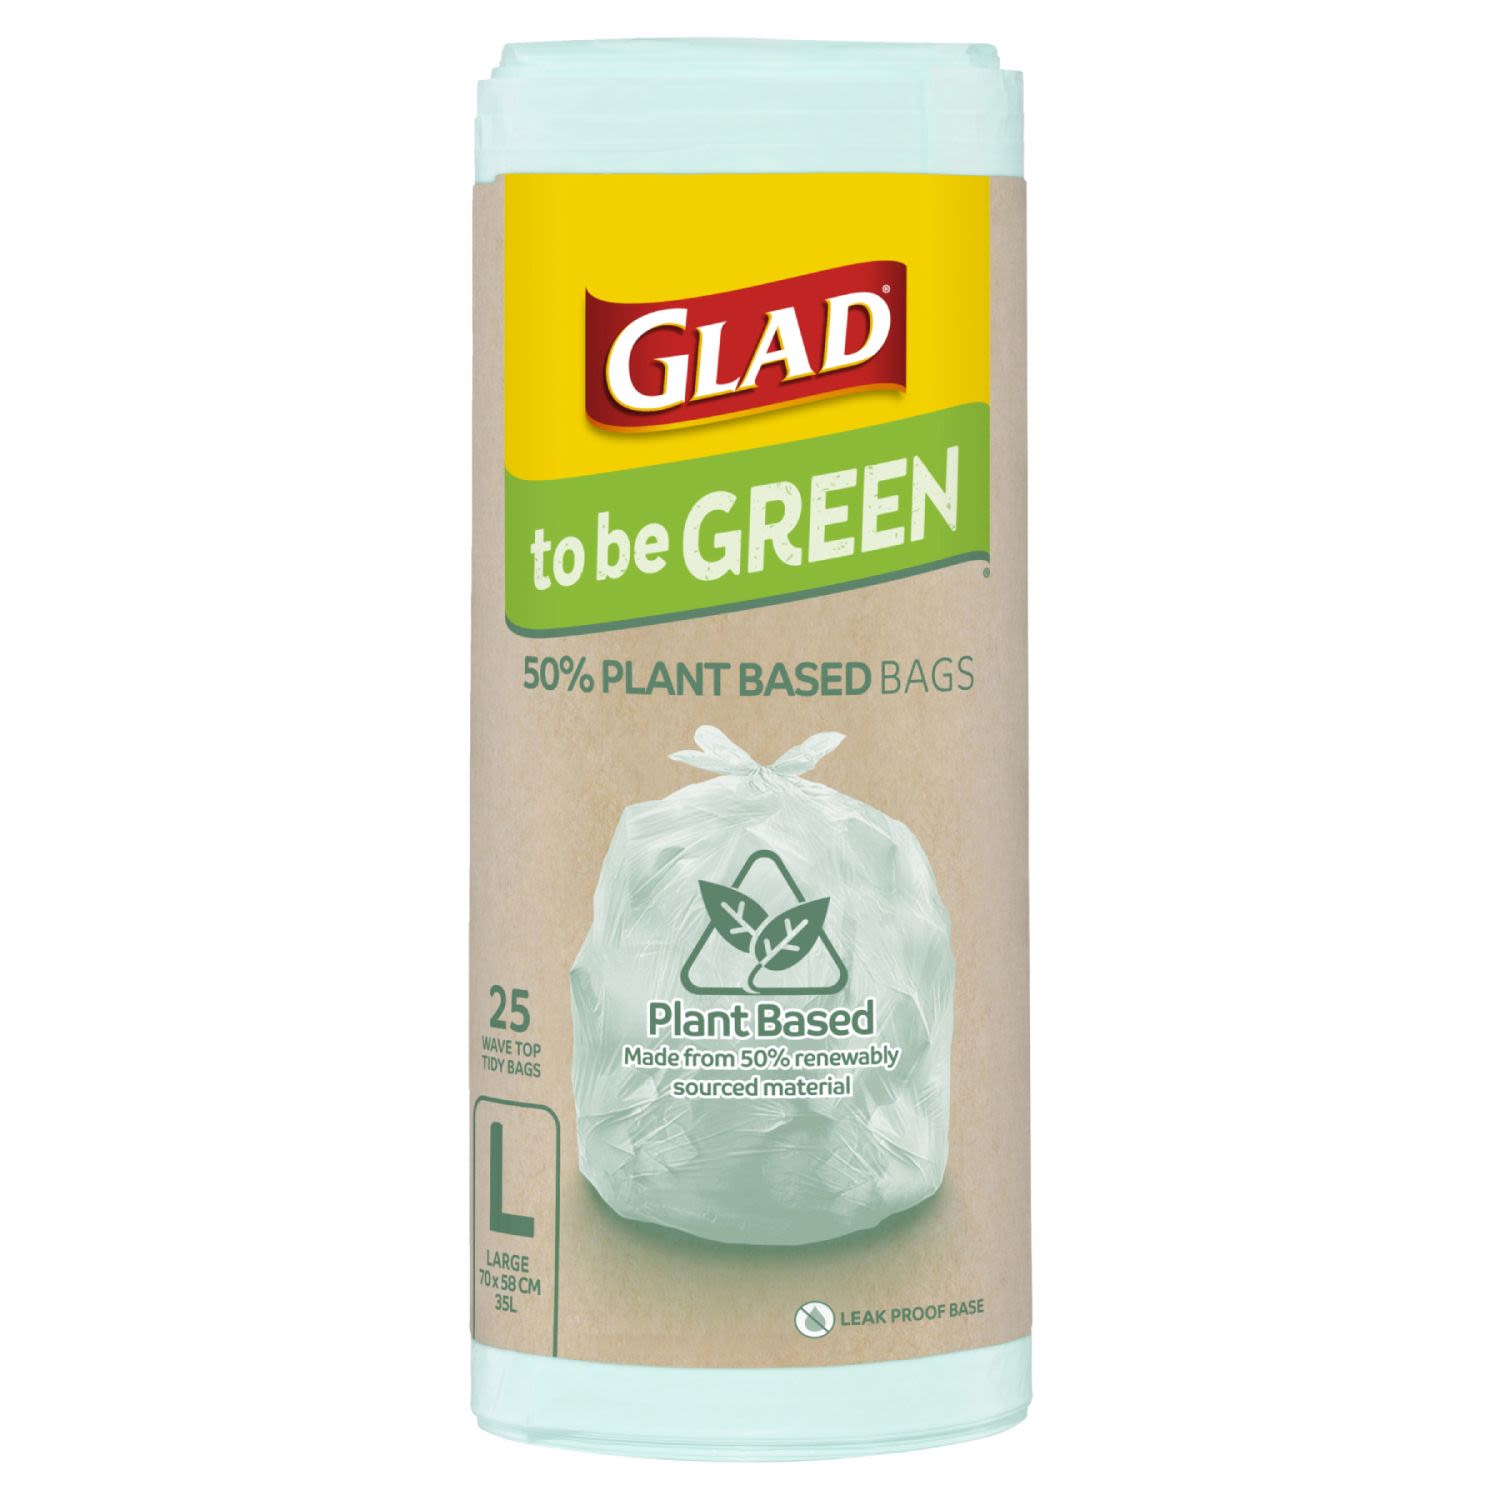 Glad to be Green 50% Plant Based Bags Large, 25 Each